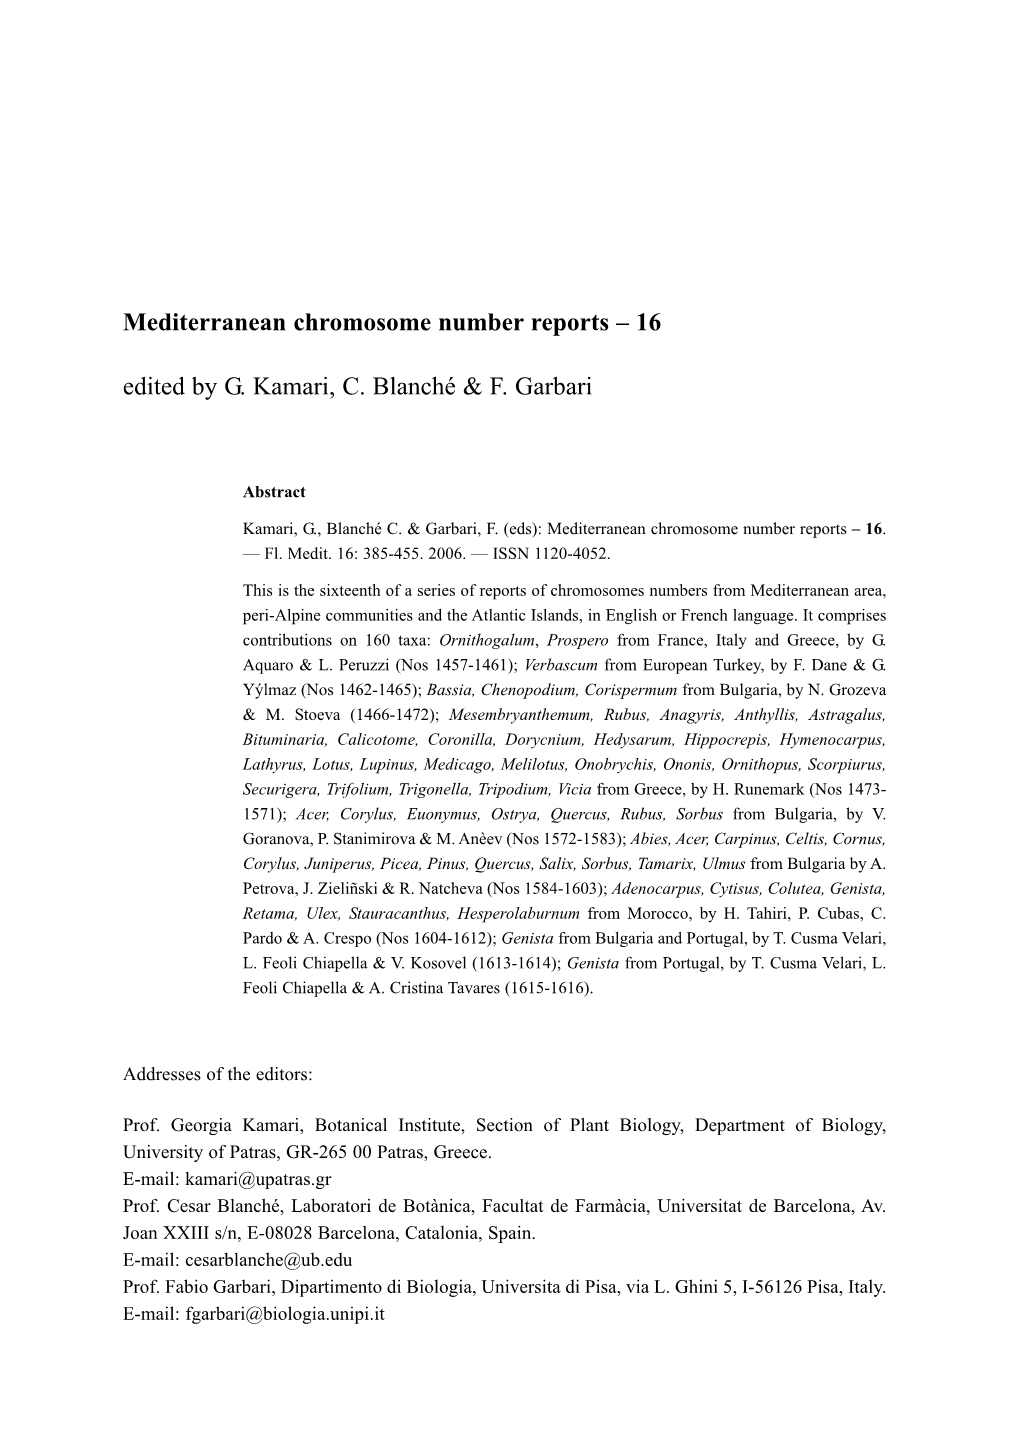 Mediterranean Chromosome Number Reports – 16 Edited by G